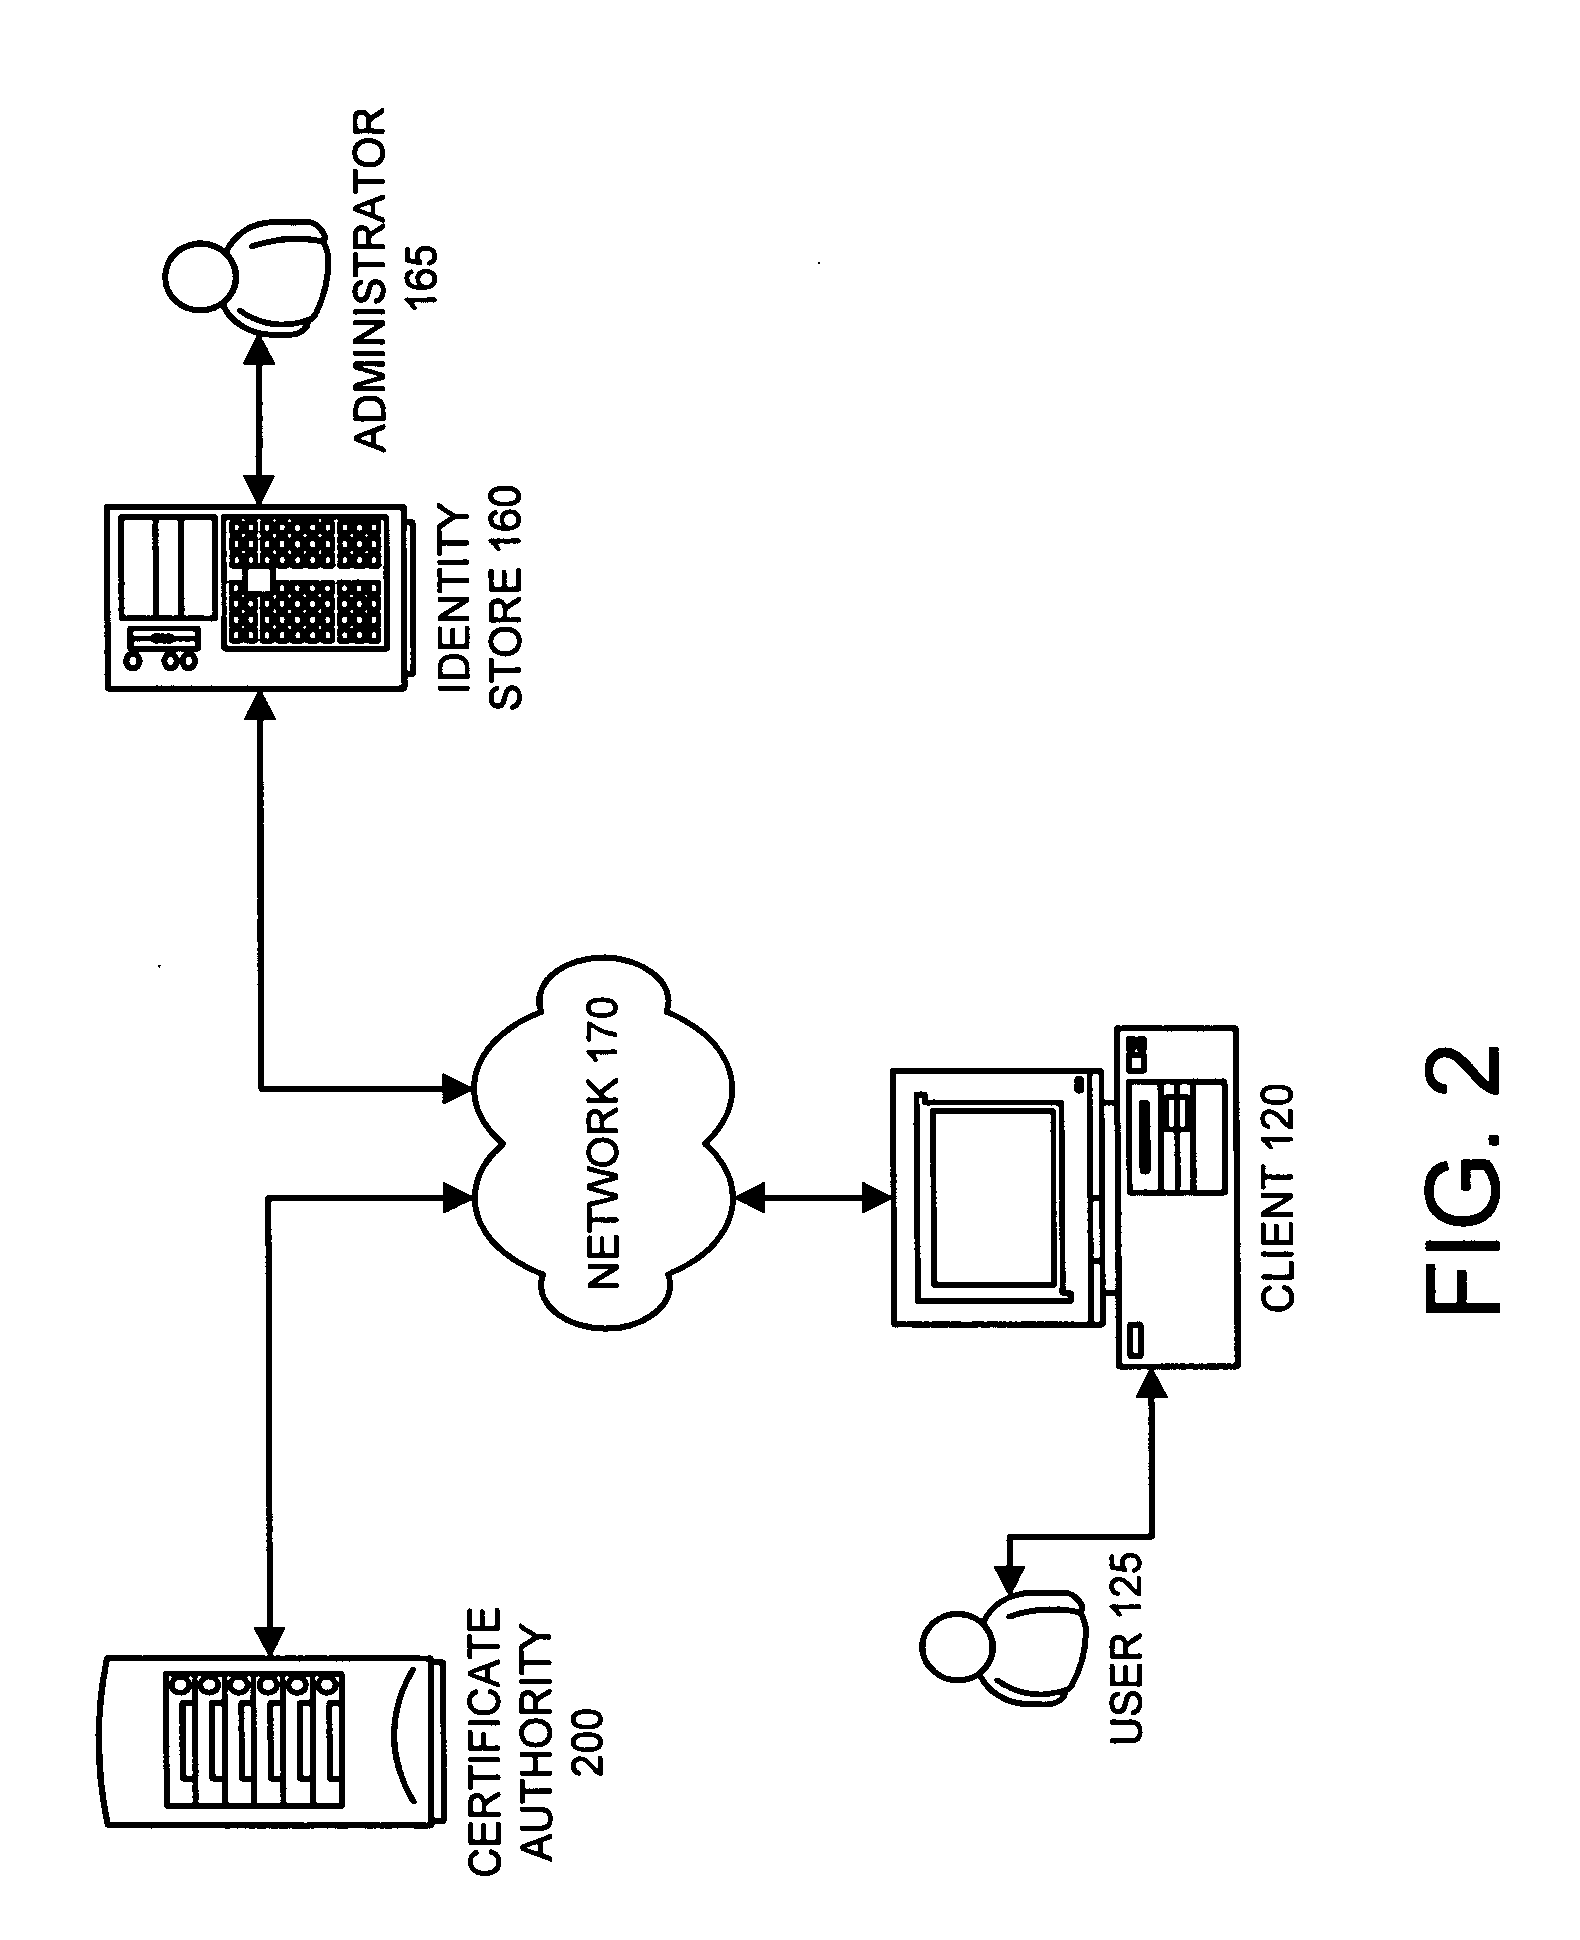 Method and apparatus for associating a digital certificate with an enterprise profile